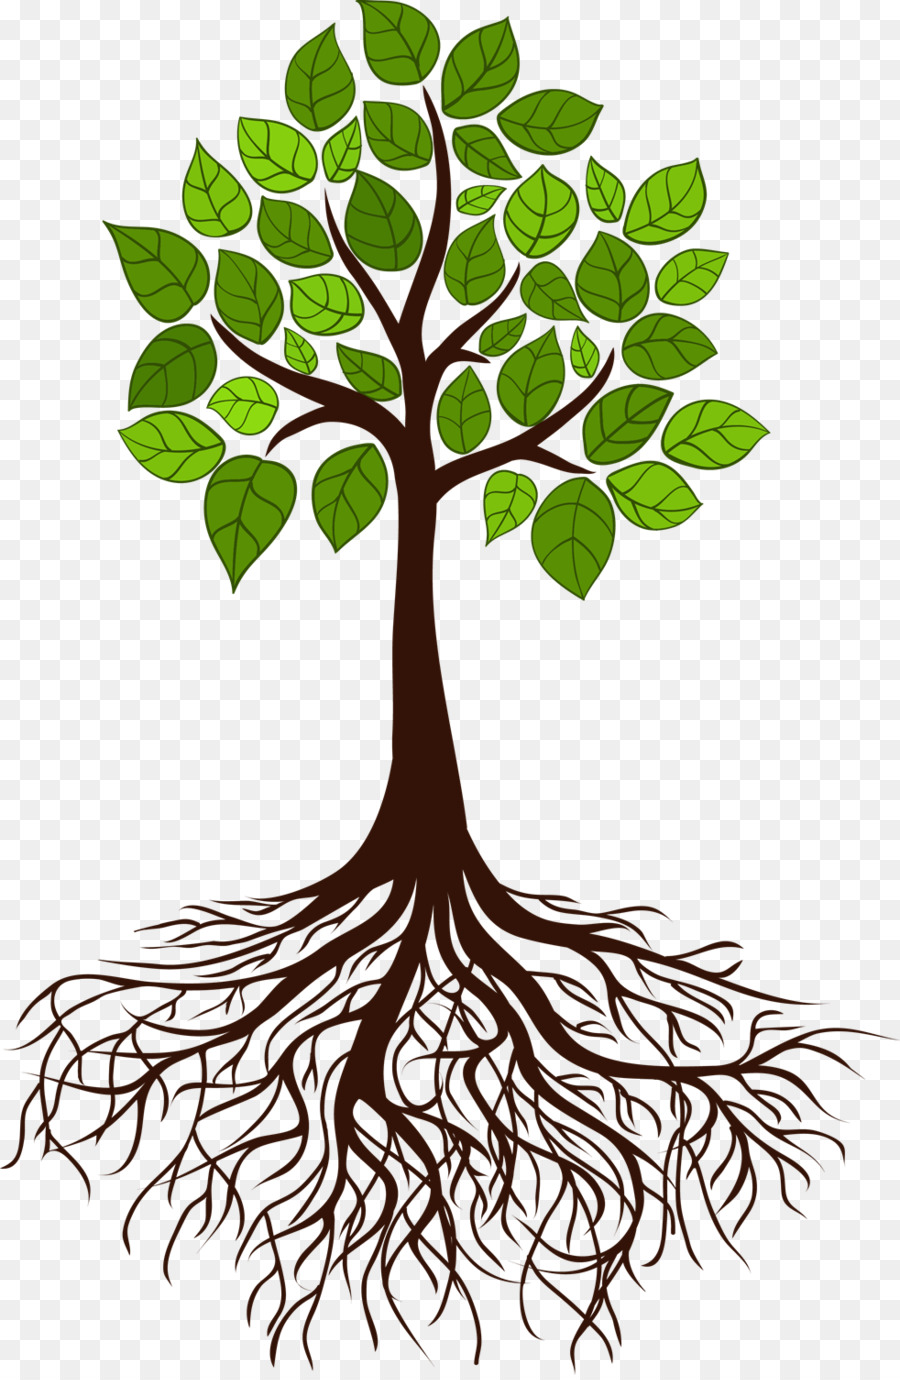 Tree Root Branch - tree roots png download - 982*1500 - Free Transparent Tree png Download.